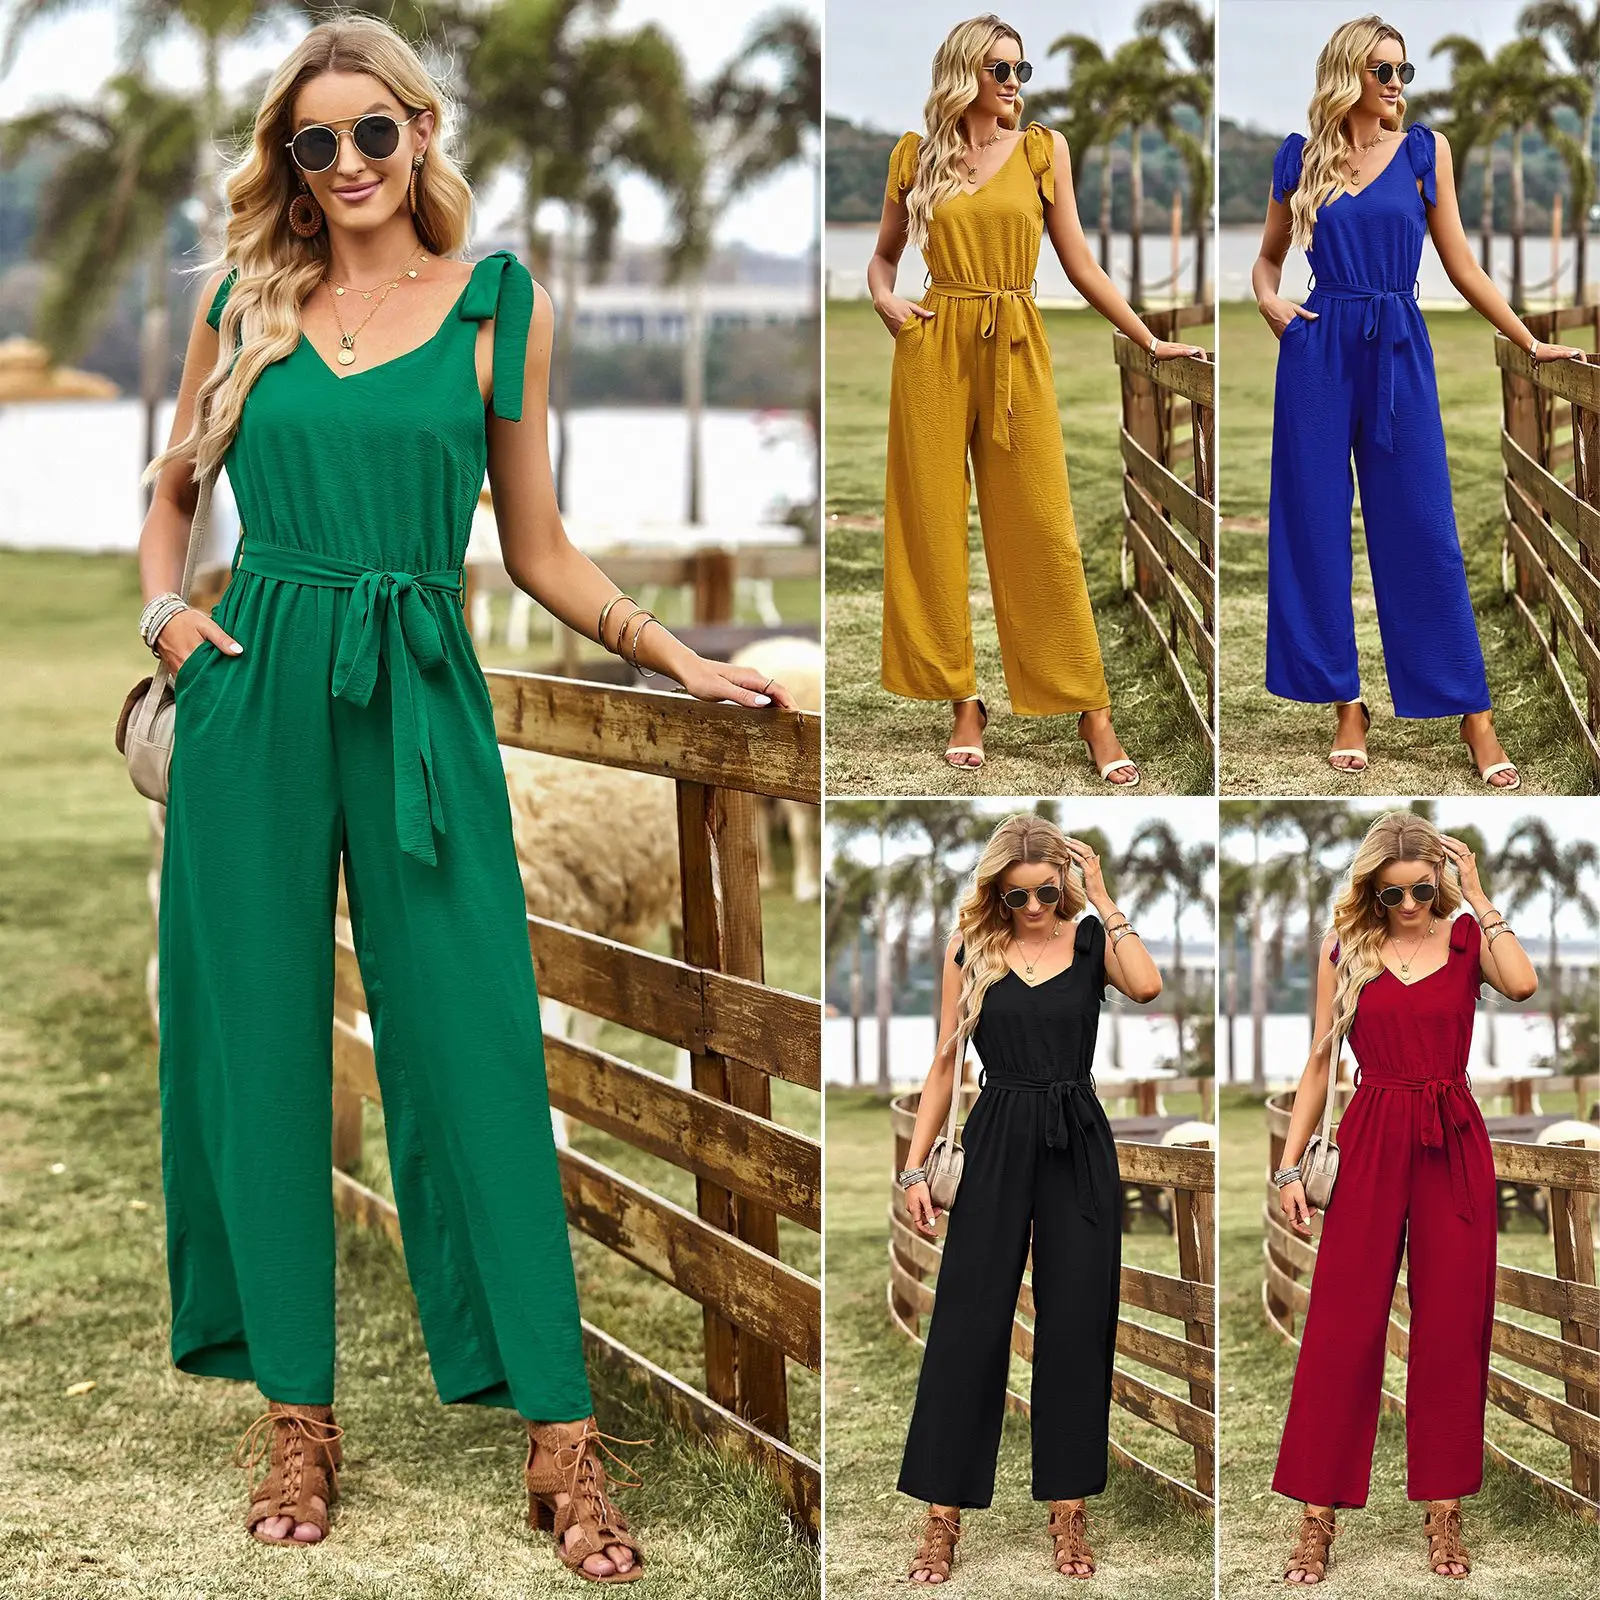 

Women Summer V-neck Lace Up Solid Color Sleeveless Waist Retraction Lace Up Commuting Versatile Casual Jumpsuits Rompers